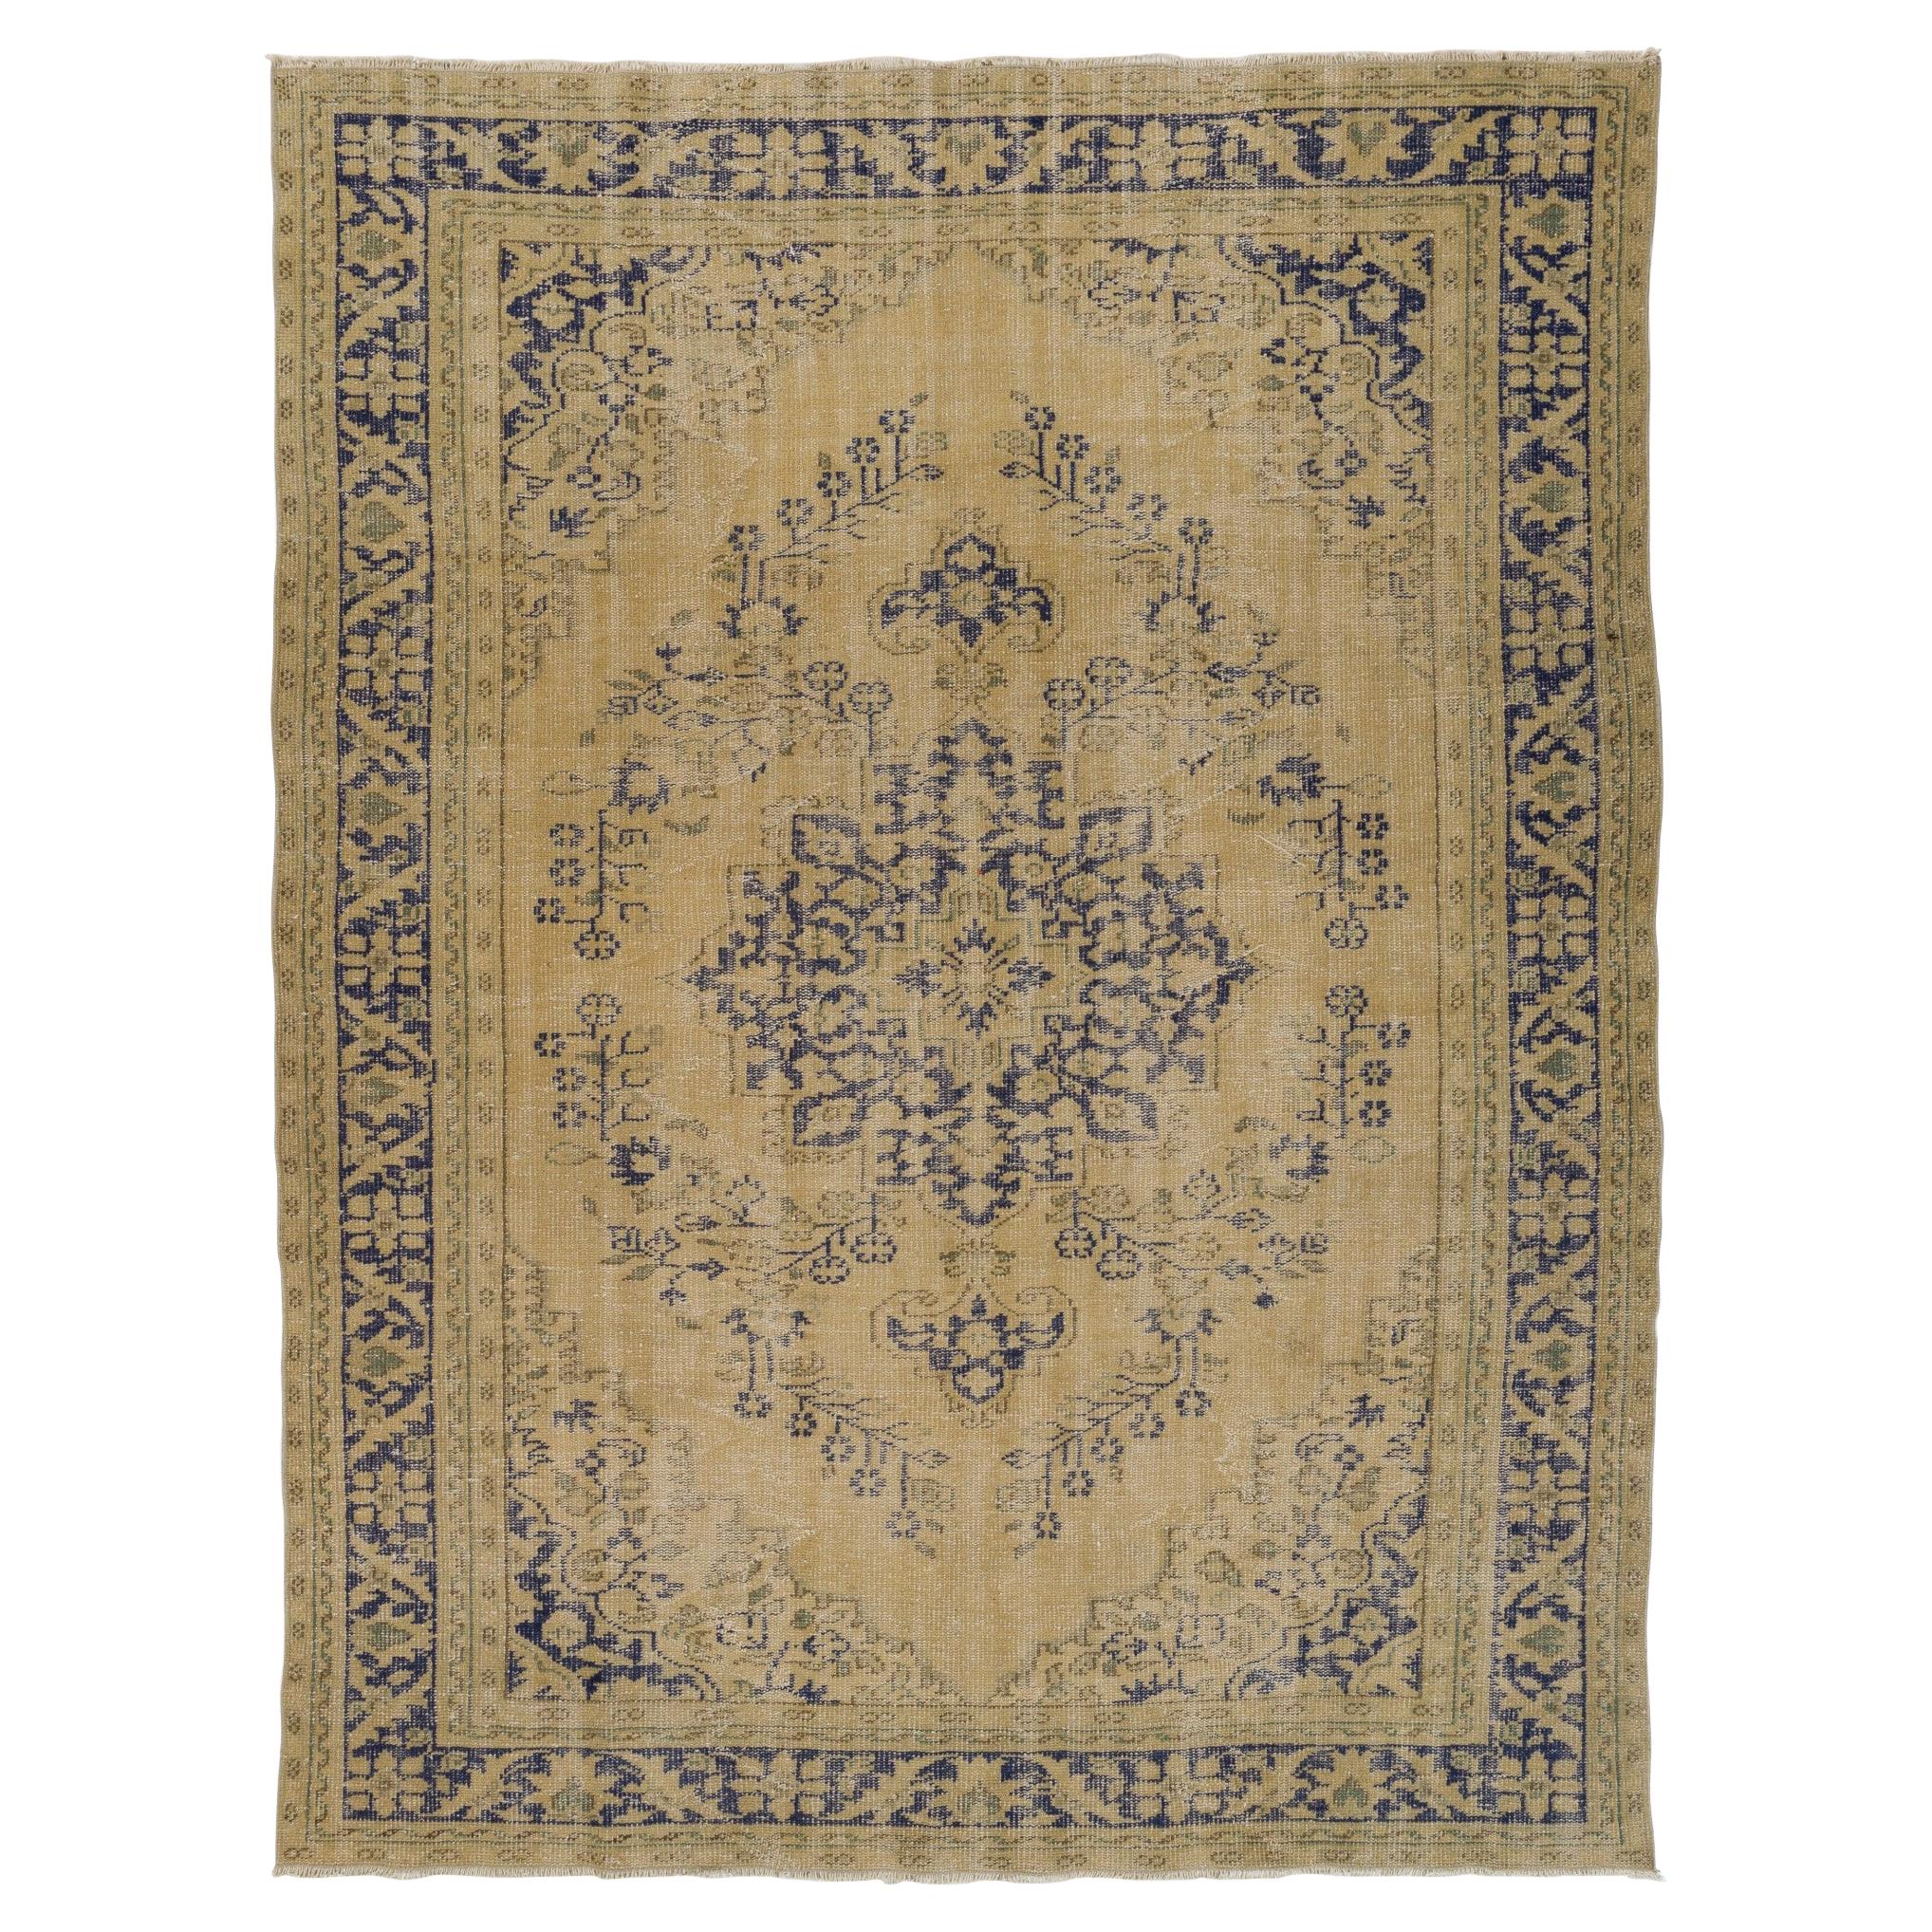 7.3x9.5 Ft Vintage Turkish Oushak Area Rug in Beige and Navy Blue colors.  For Sale